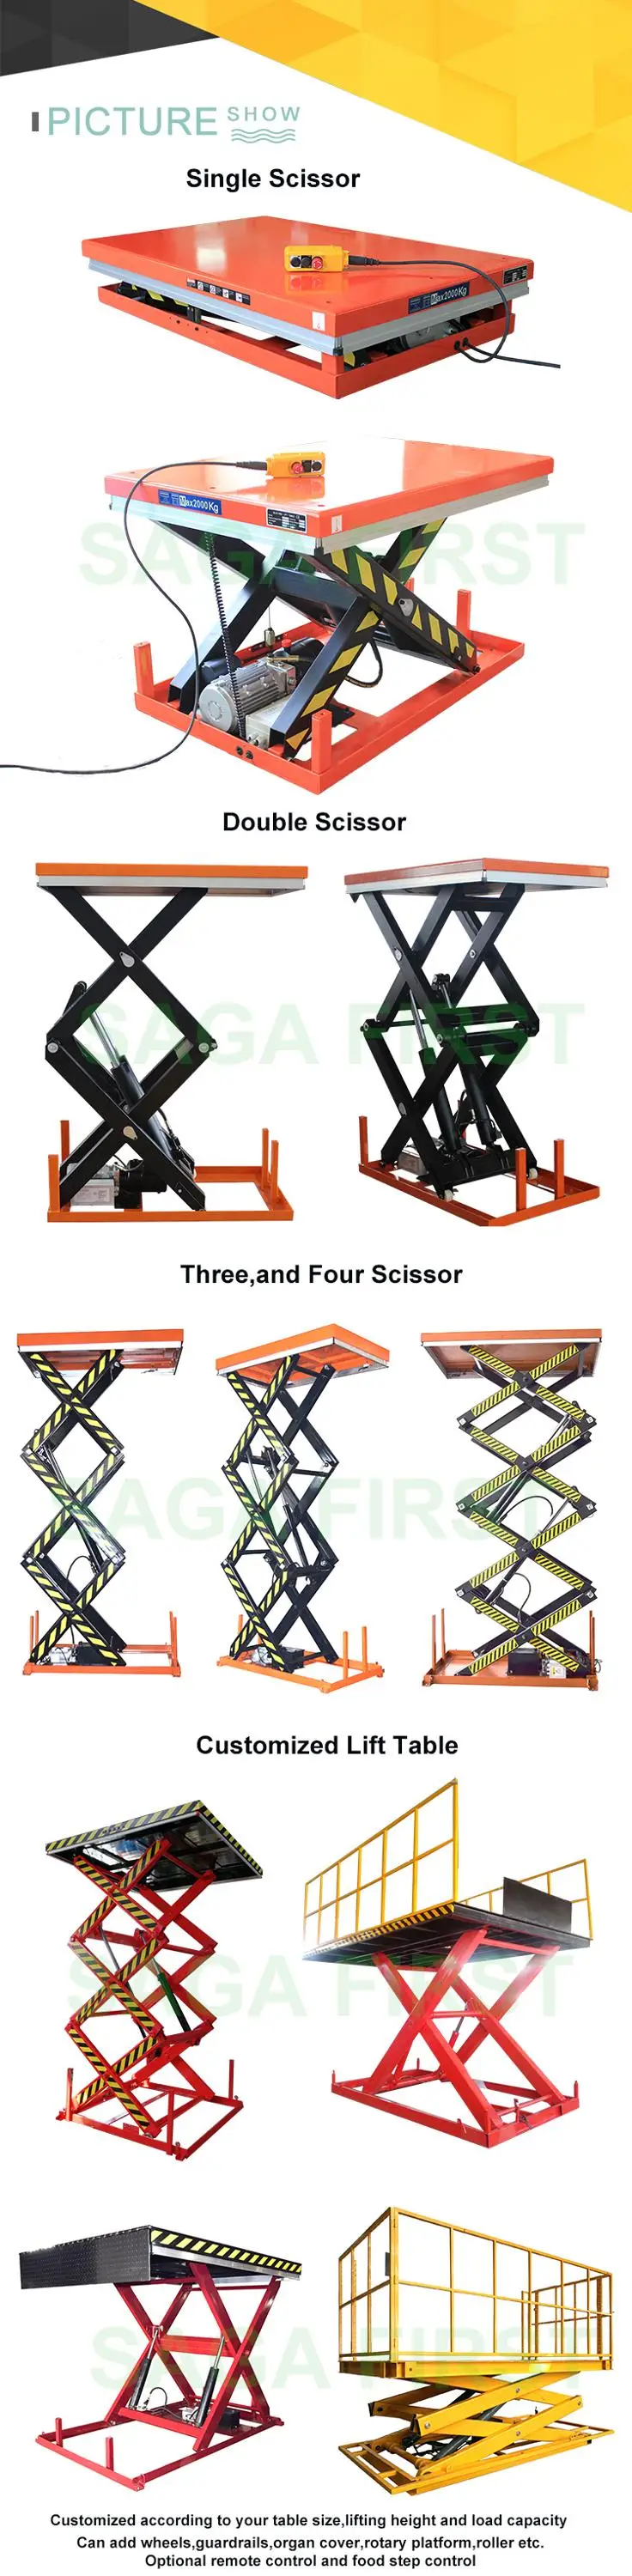 Sagafirst Customized Workshop Use Electric Fixed Hydraulic Lifting Table Platform Jack Lifter